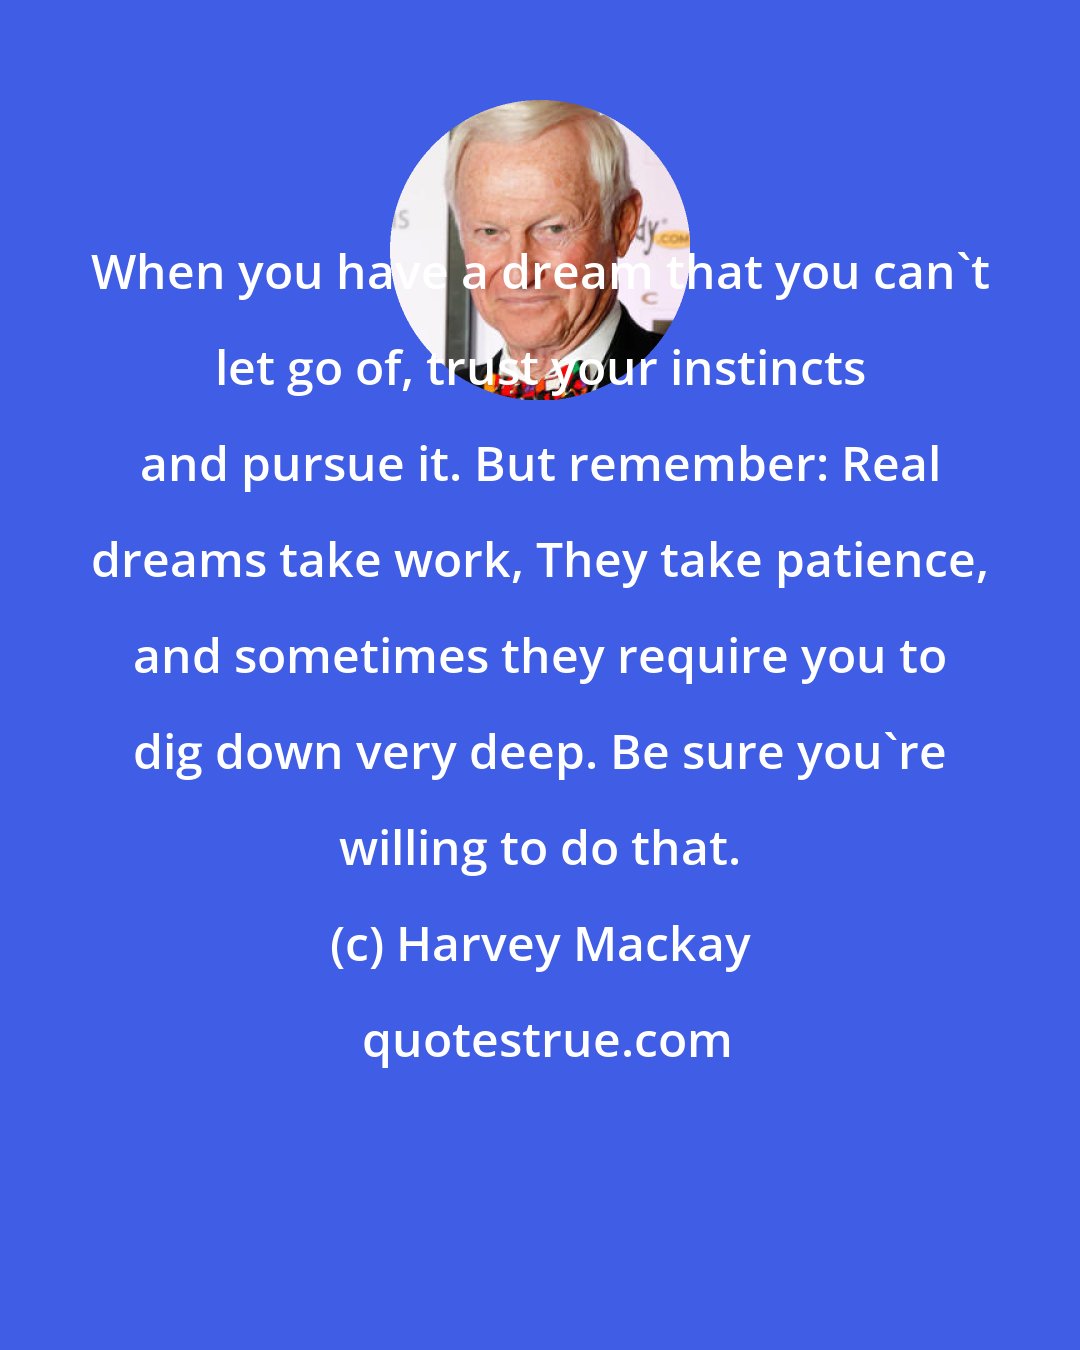 Harvey Mackay: When you have a dream that you can't let go of, trust your instincts and pursue it. But remember: Real dreams take work, They take patience, and sometimes they require you to dig down very deep. Be sure you're willing to do that.